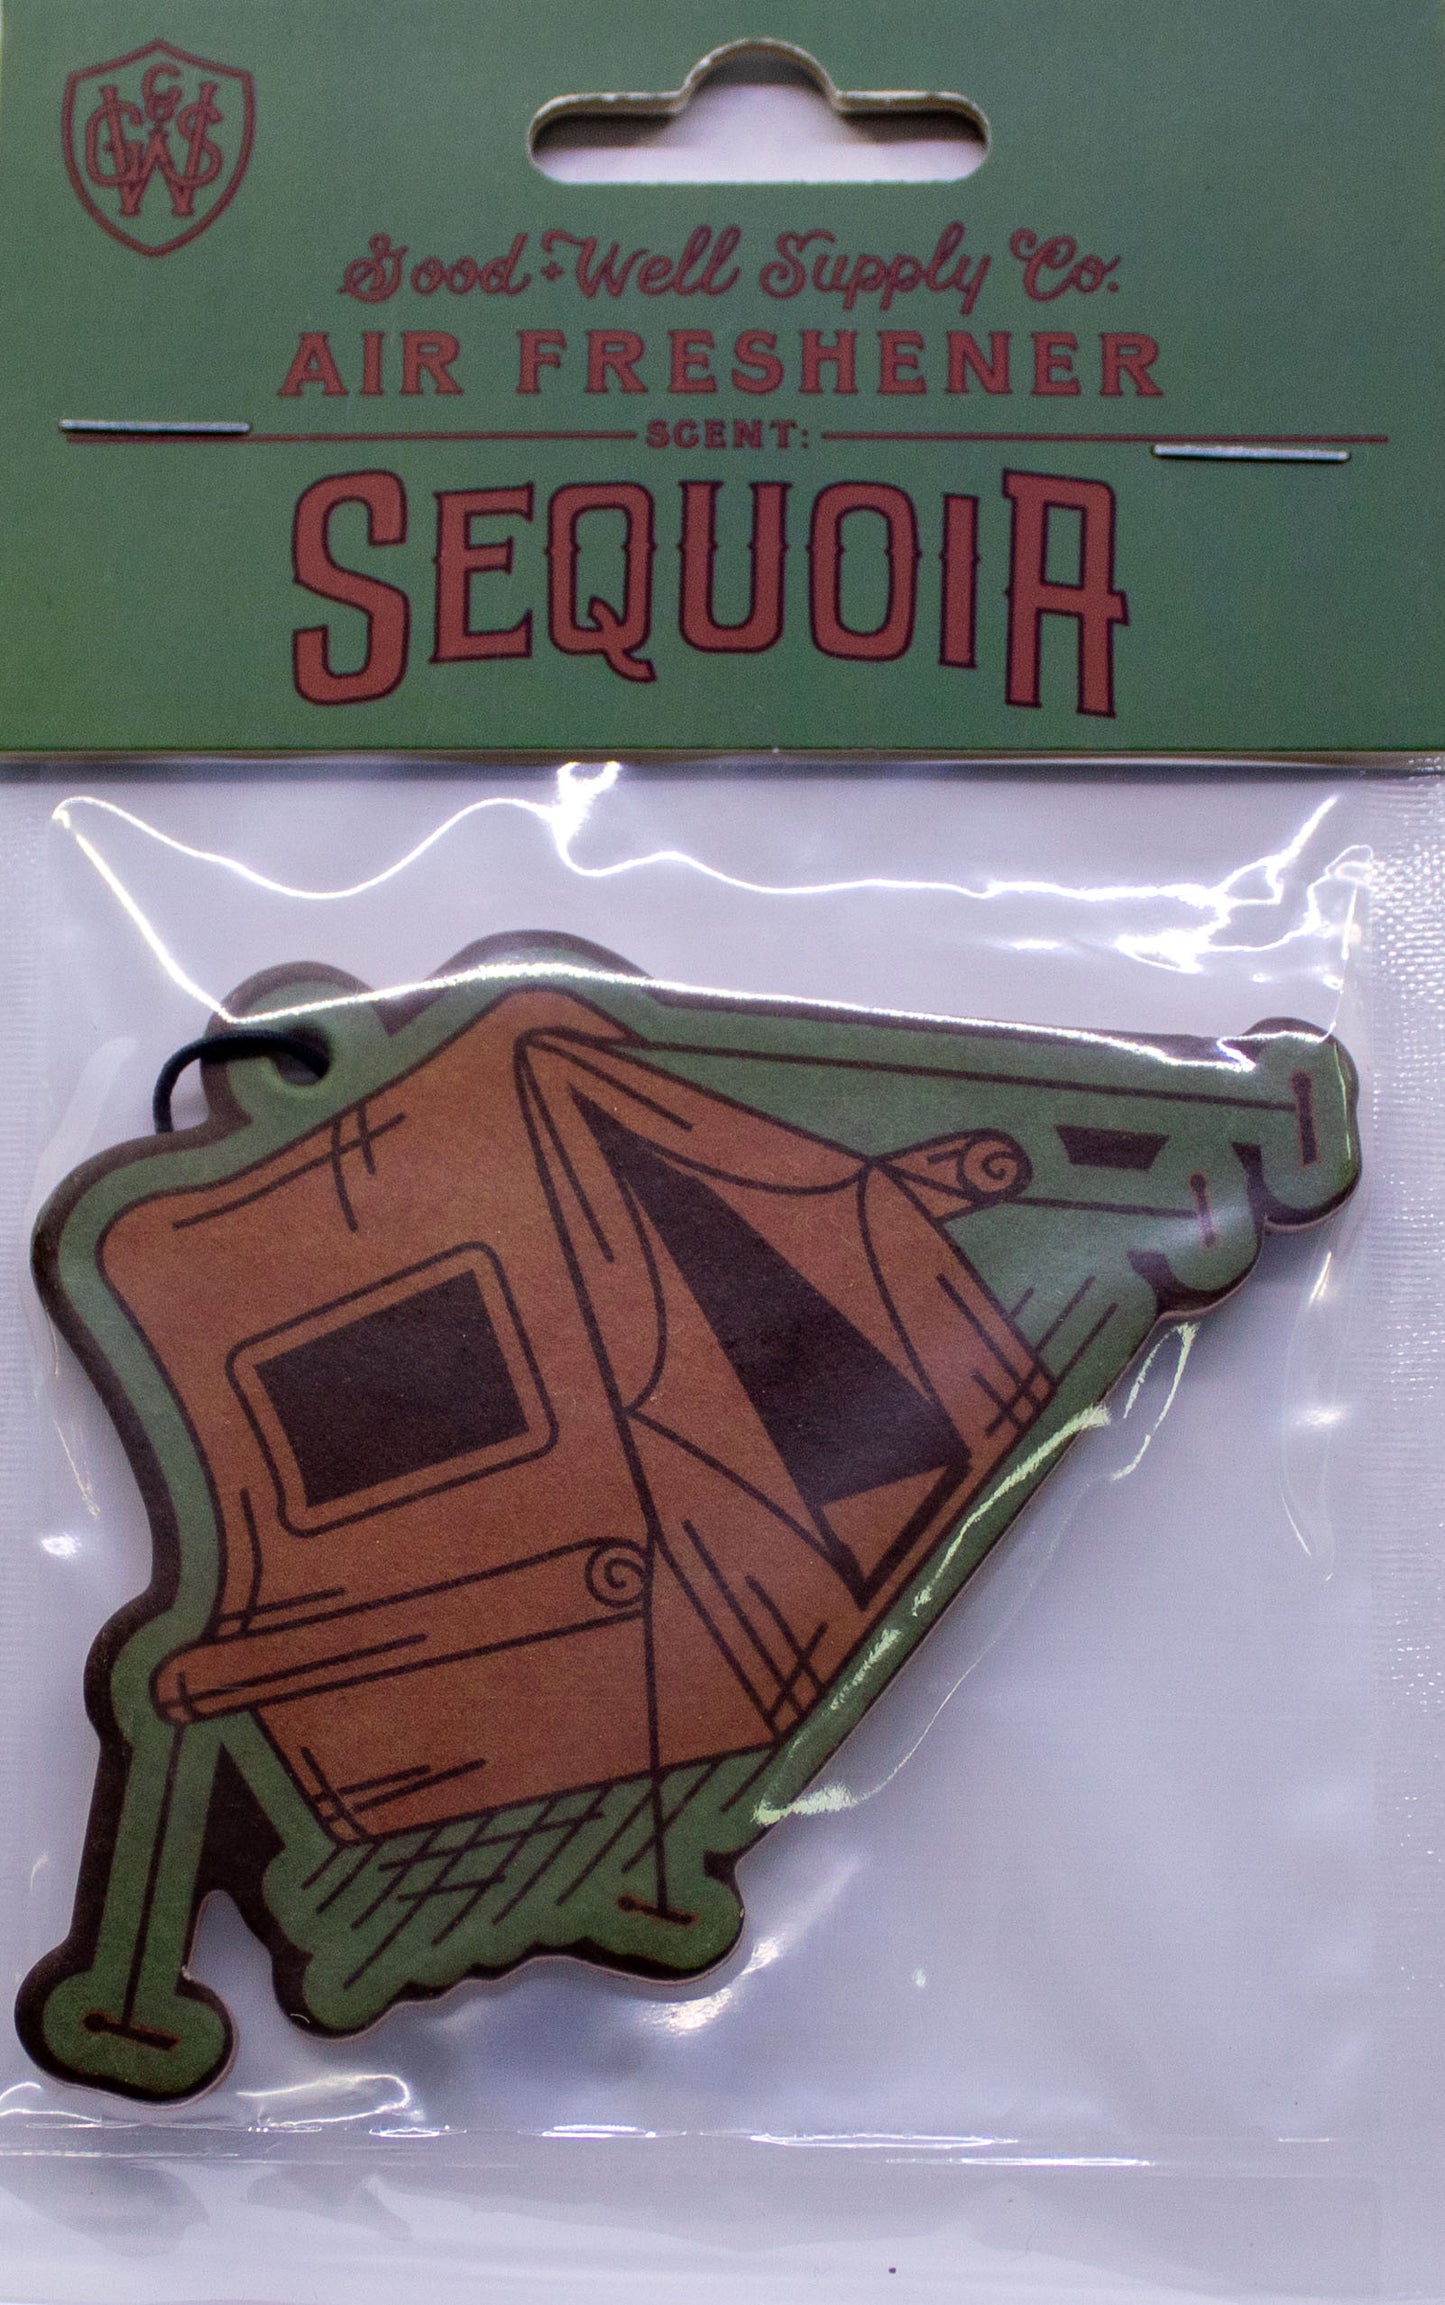 Good and Well Supply Co. Air Freshener Sequoia